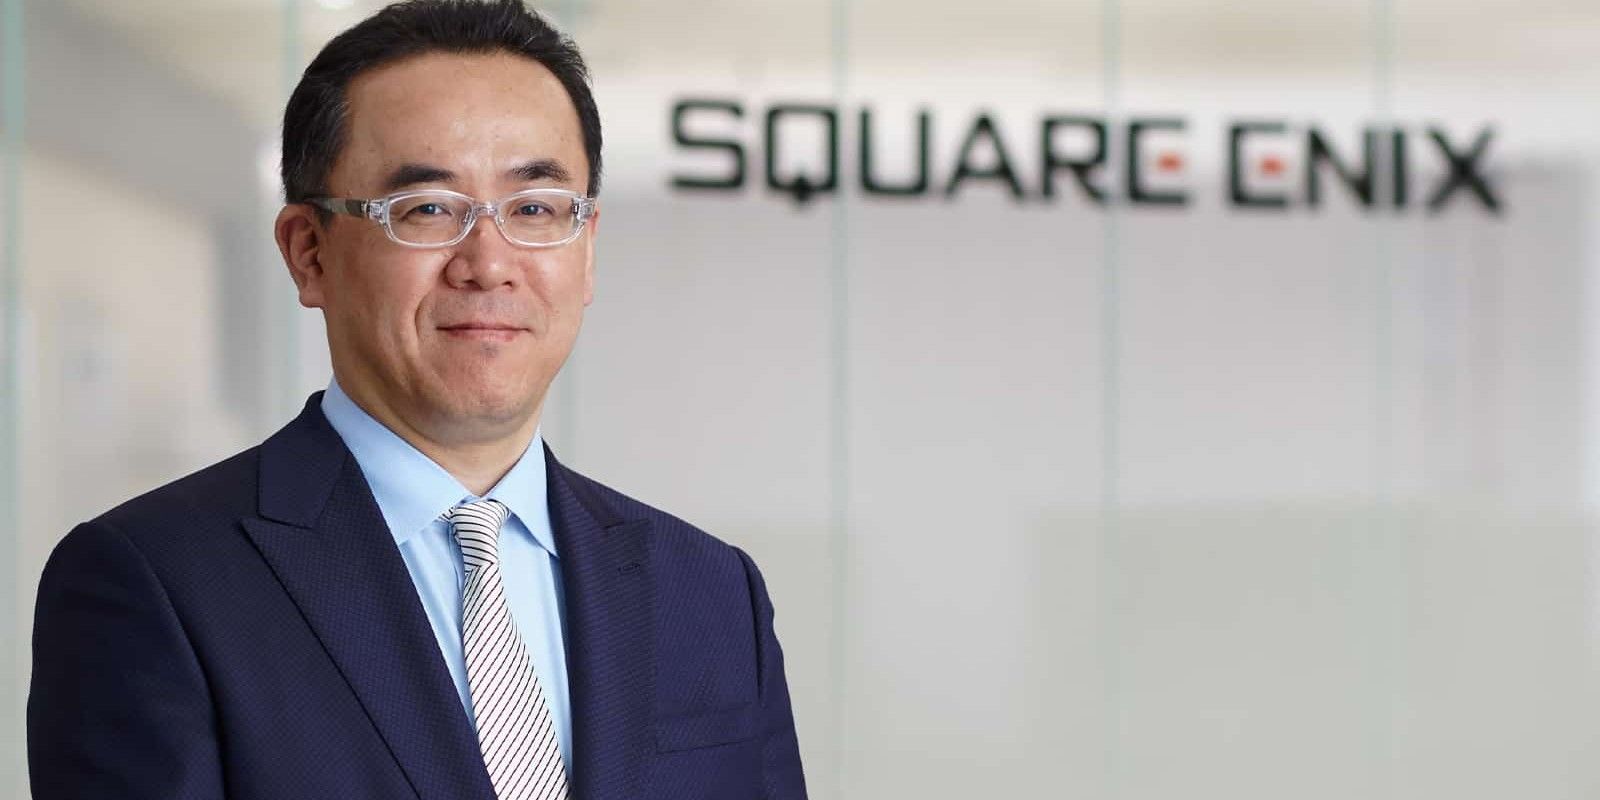 Microsoft wanted to acquire Square Enix as part of plan for mobile